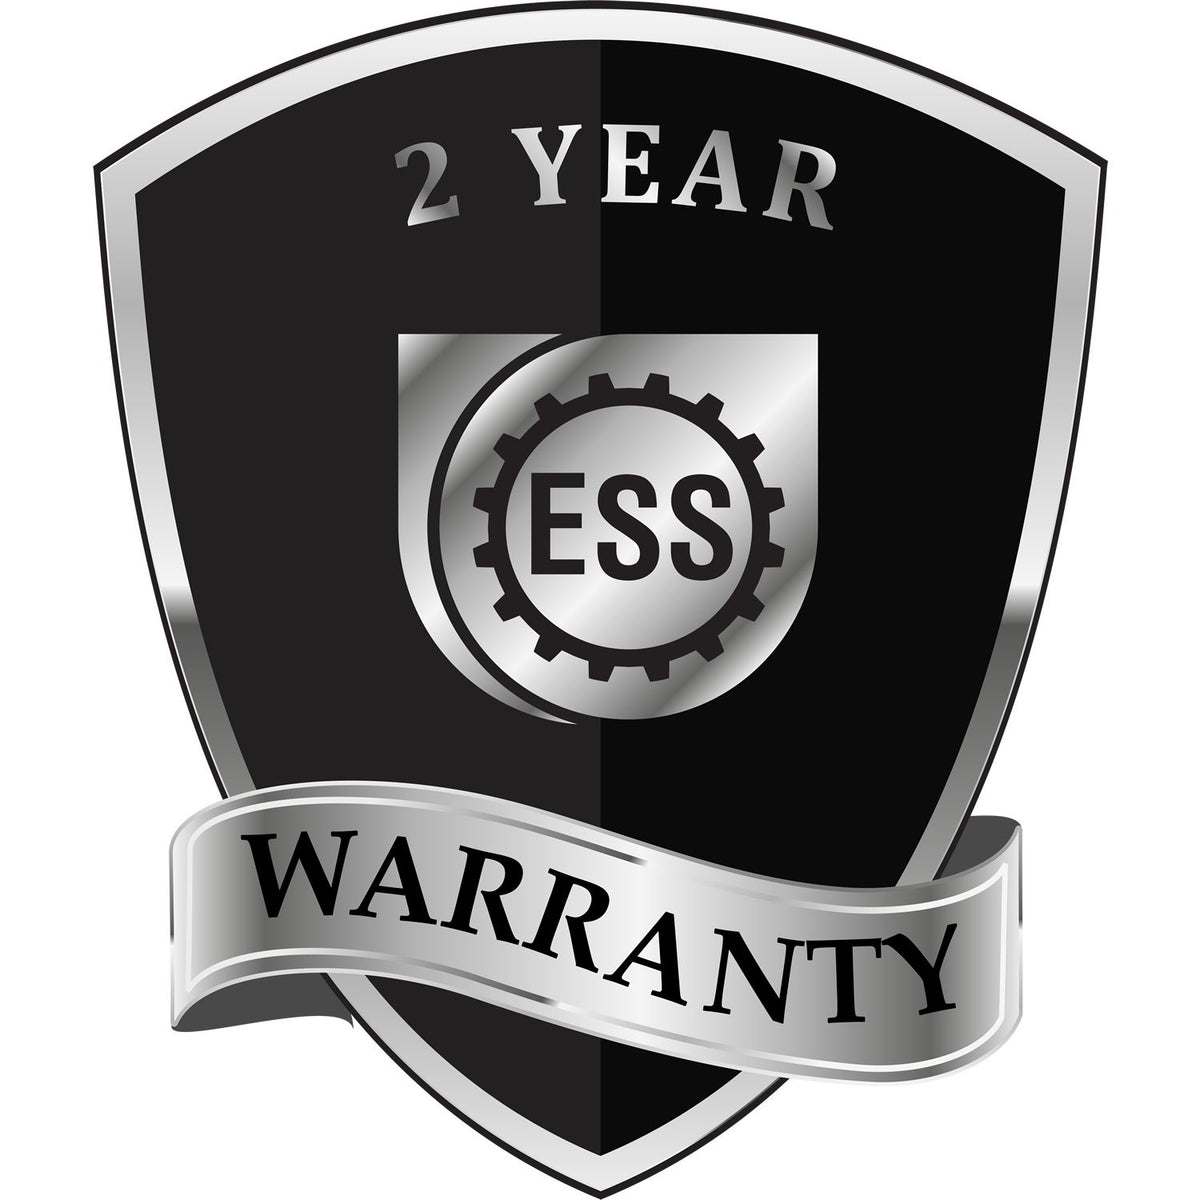 A black and silver badge or emblem showing warranty information for the Handheld Maine Professional Geologist Embosser